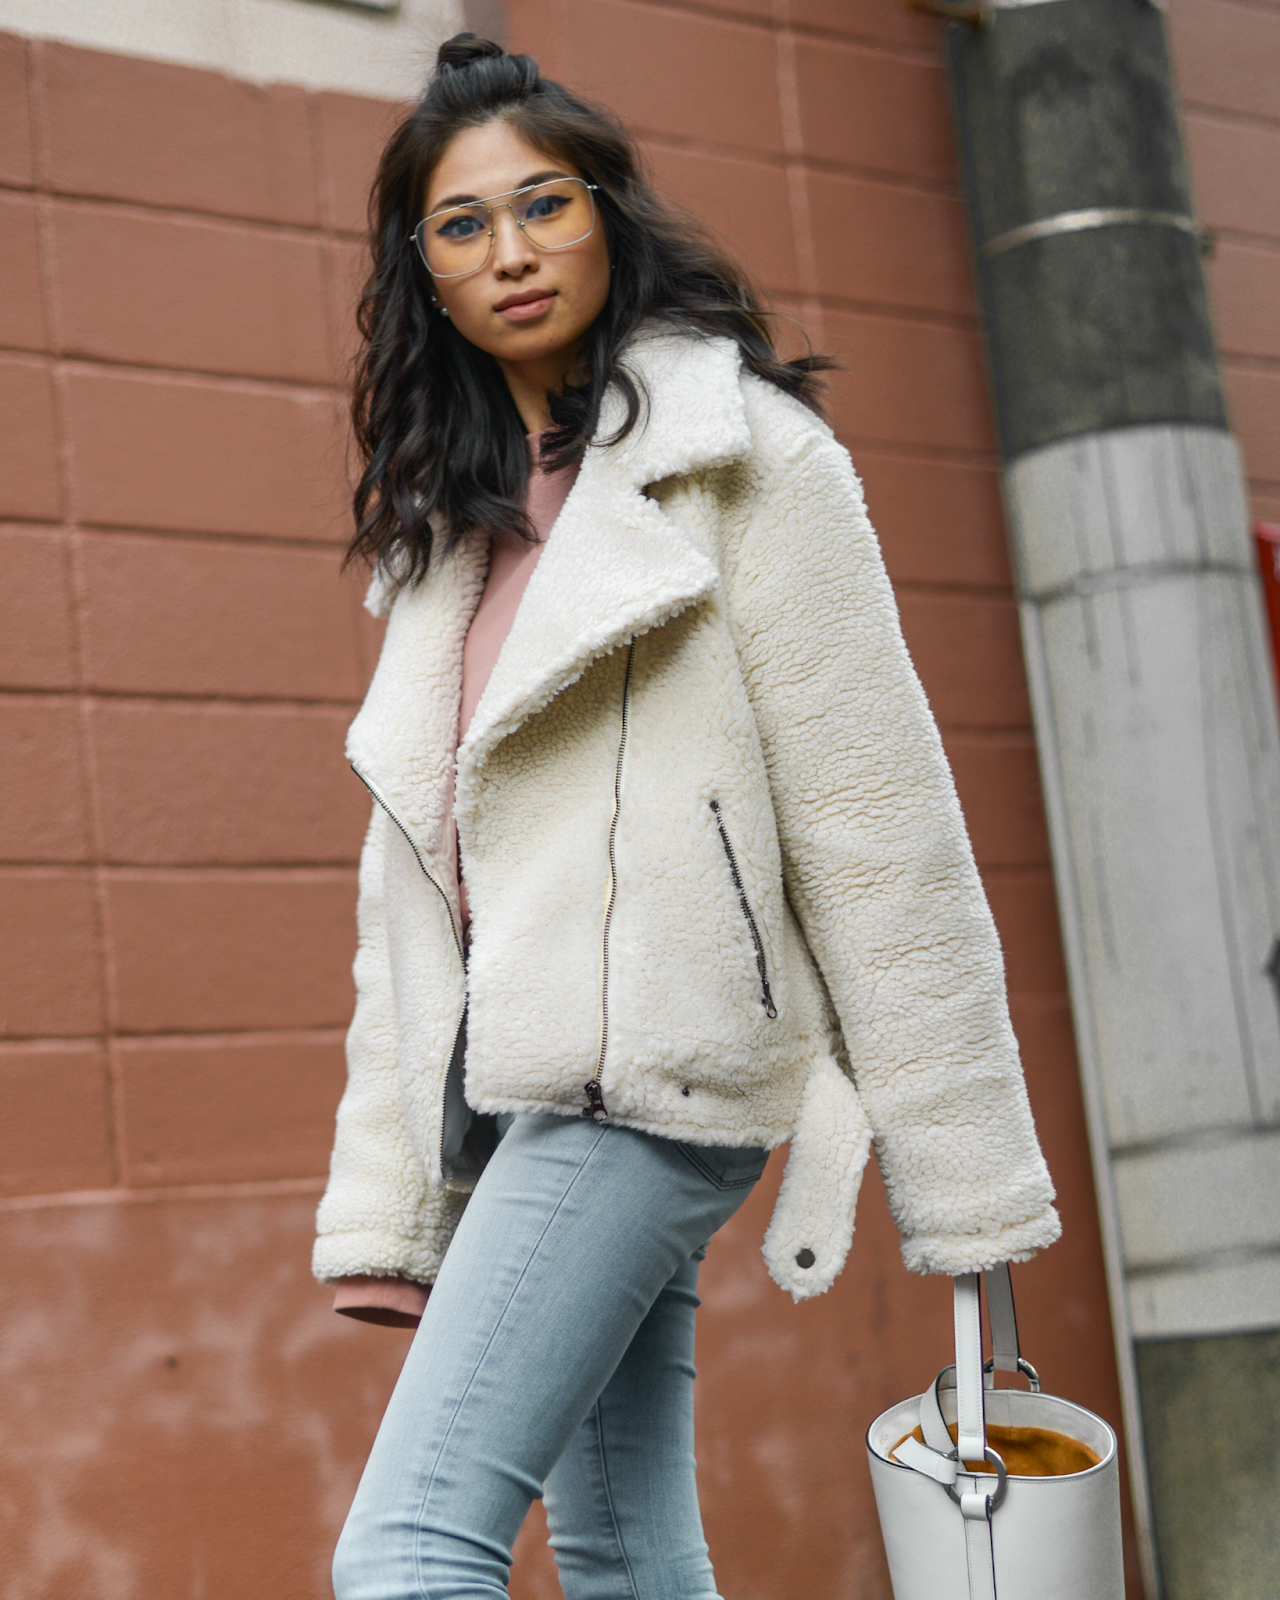 One Shearling Jacket, Two Different Outfits